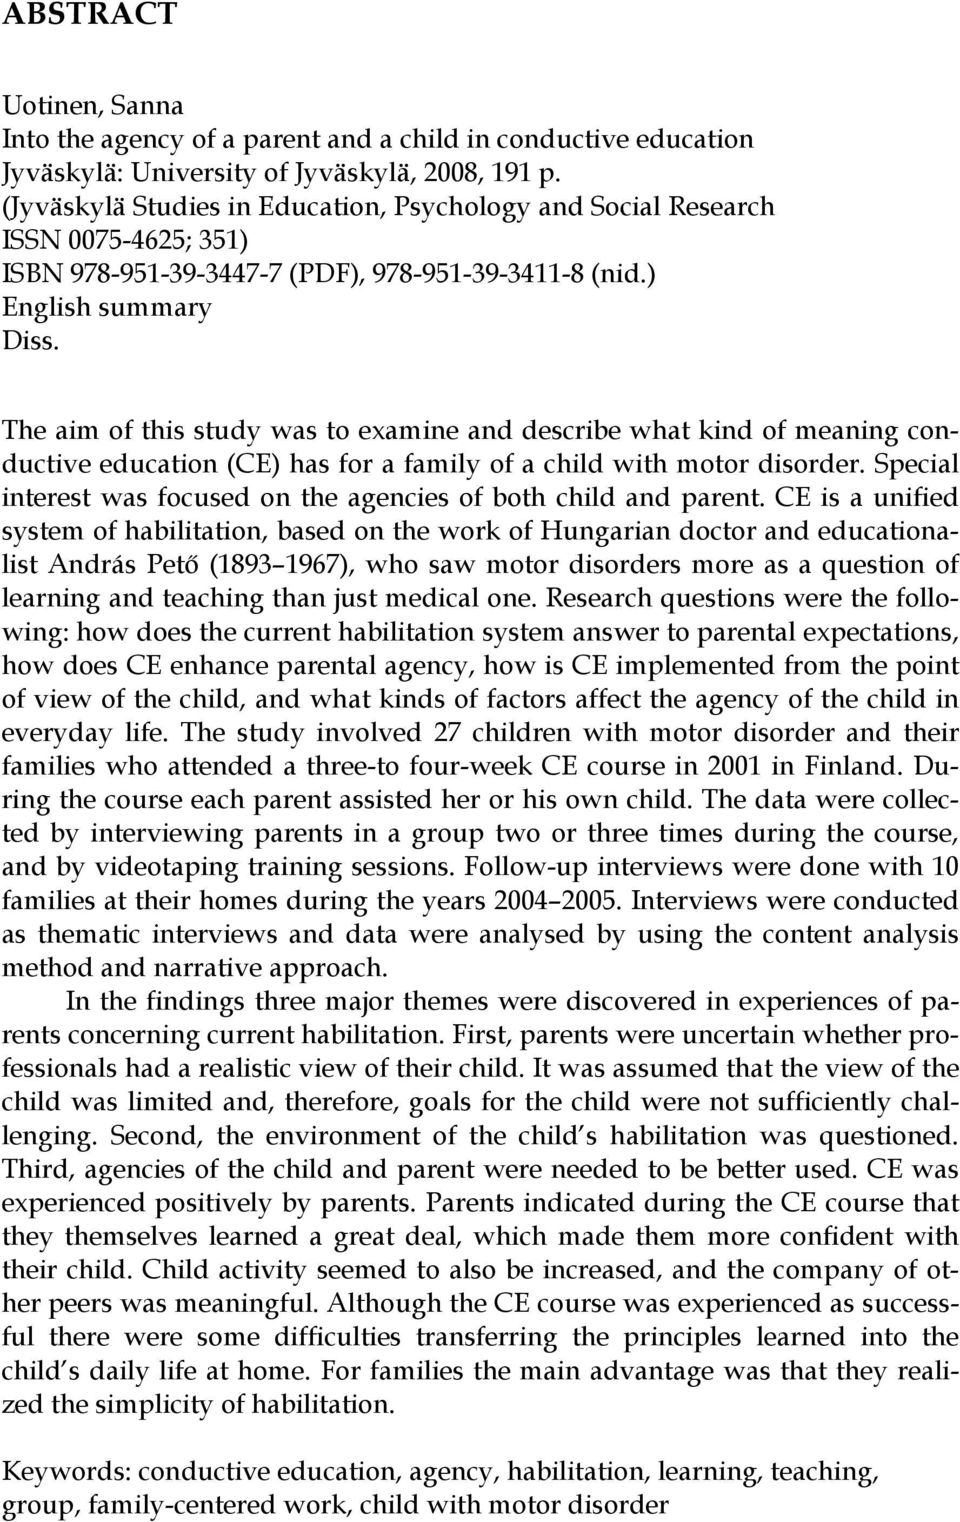 The aim of this study was to examine and describe what kind of meaning conductive education (CE) has for a family of a child with motor disorder.